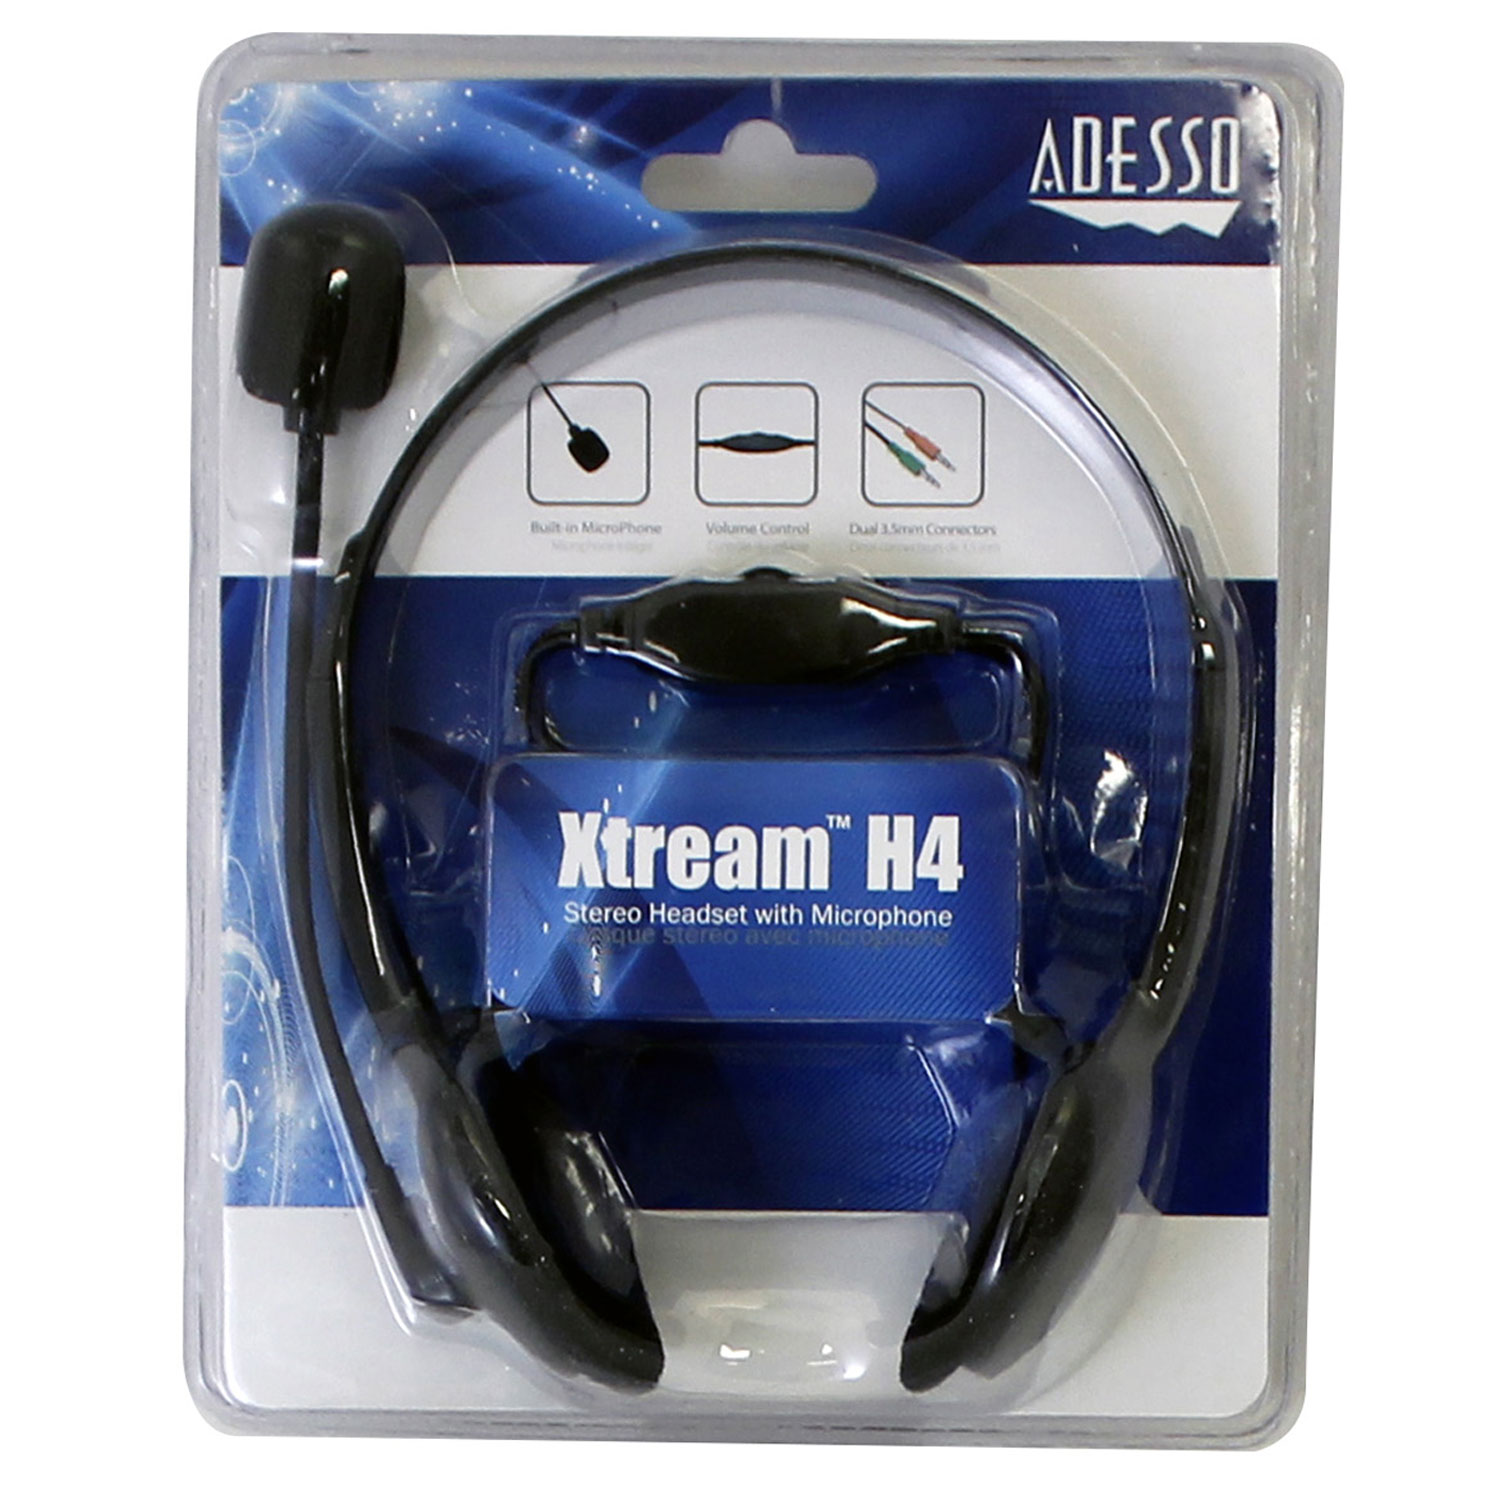 Xtream H4 Stereo Headset With Microphone